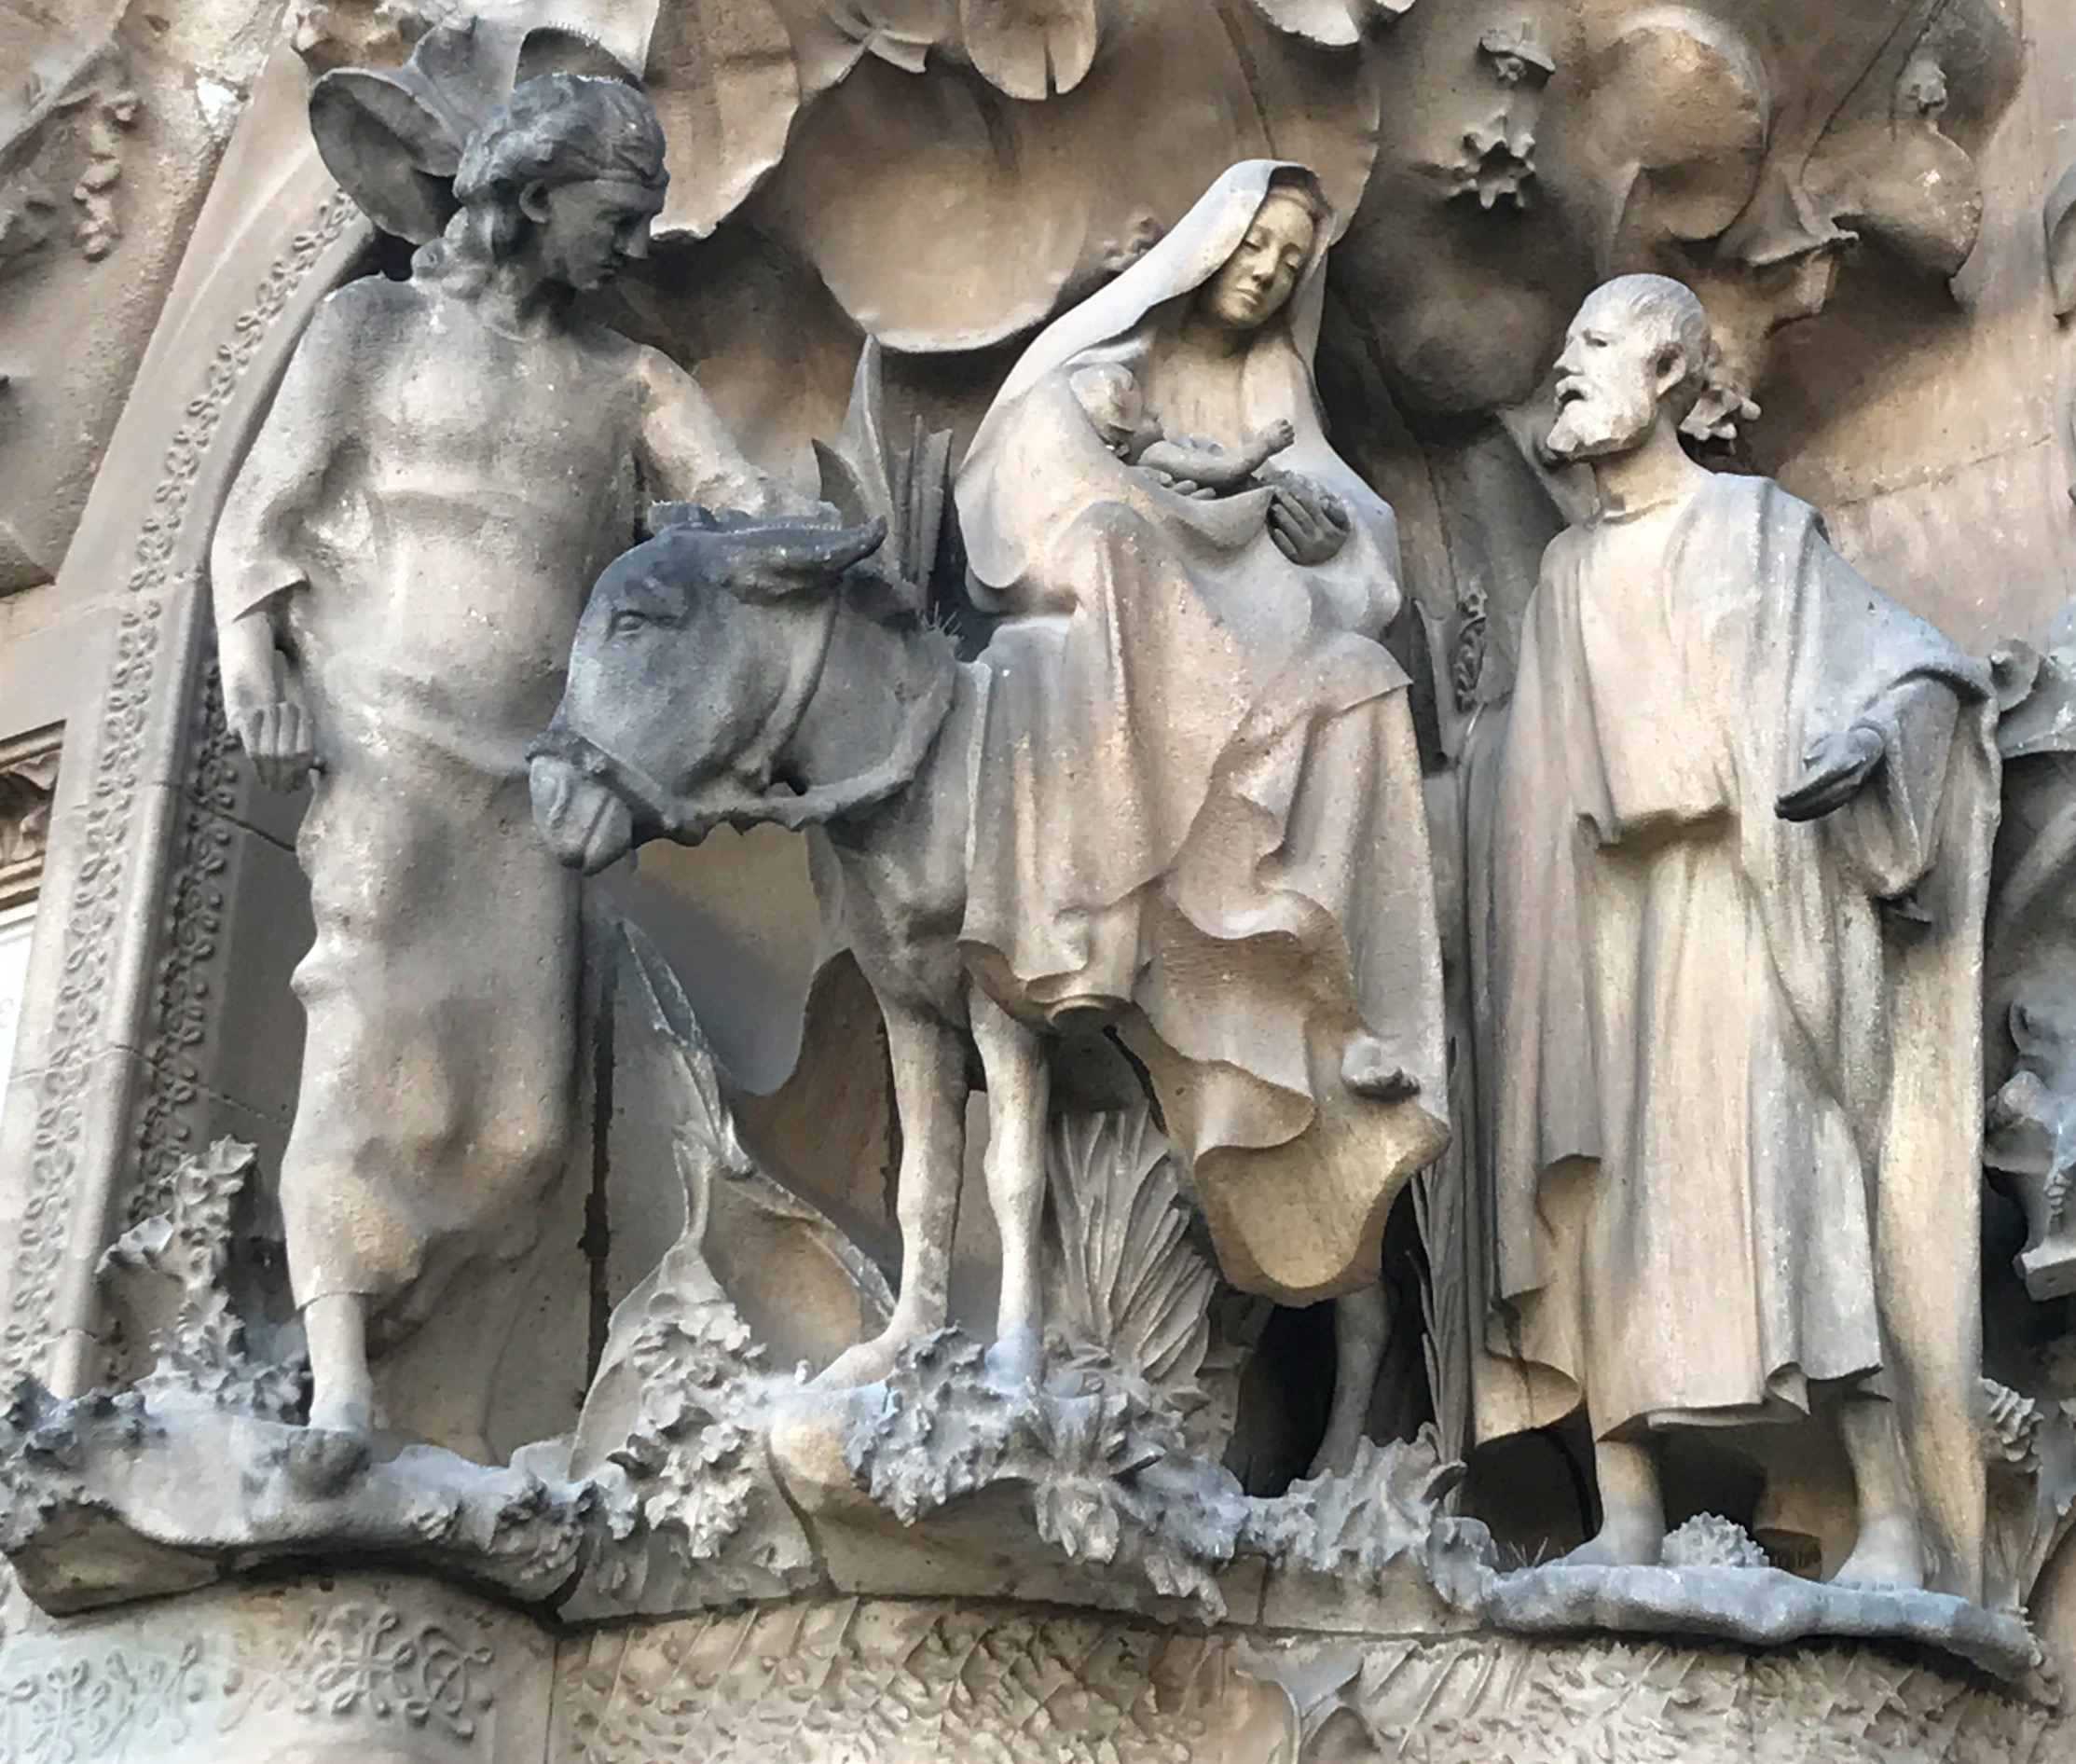 The Nativity Facade portrays scenes from the early life of Christ. This sculpture depicts the Holy Family's flight to Egypt.